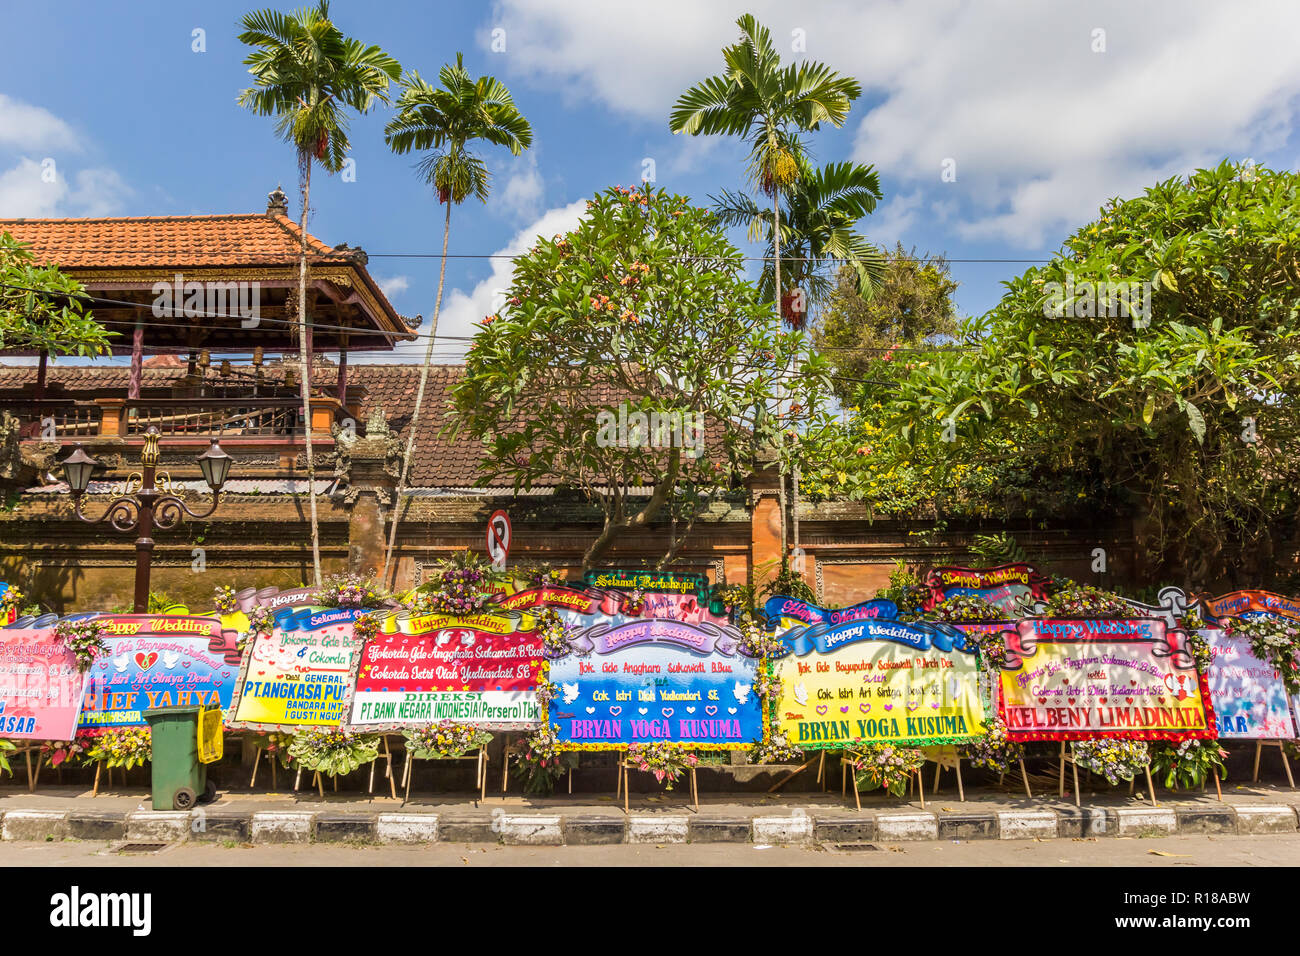 Huge congratulation cards for a wedding taking place at the Ubud Palace Stock Photo